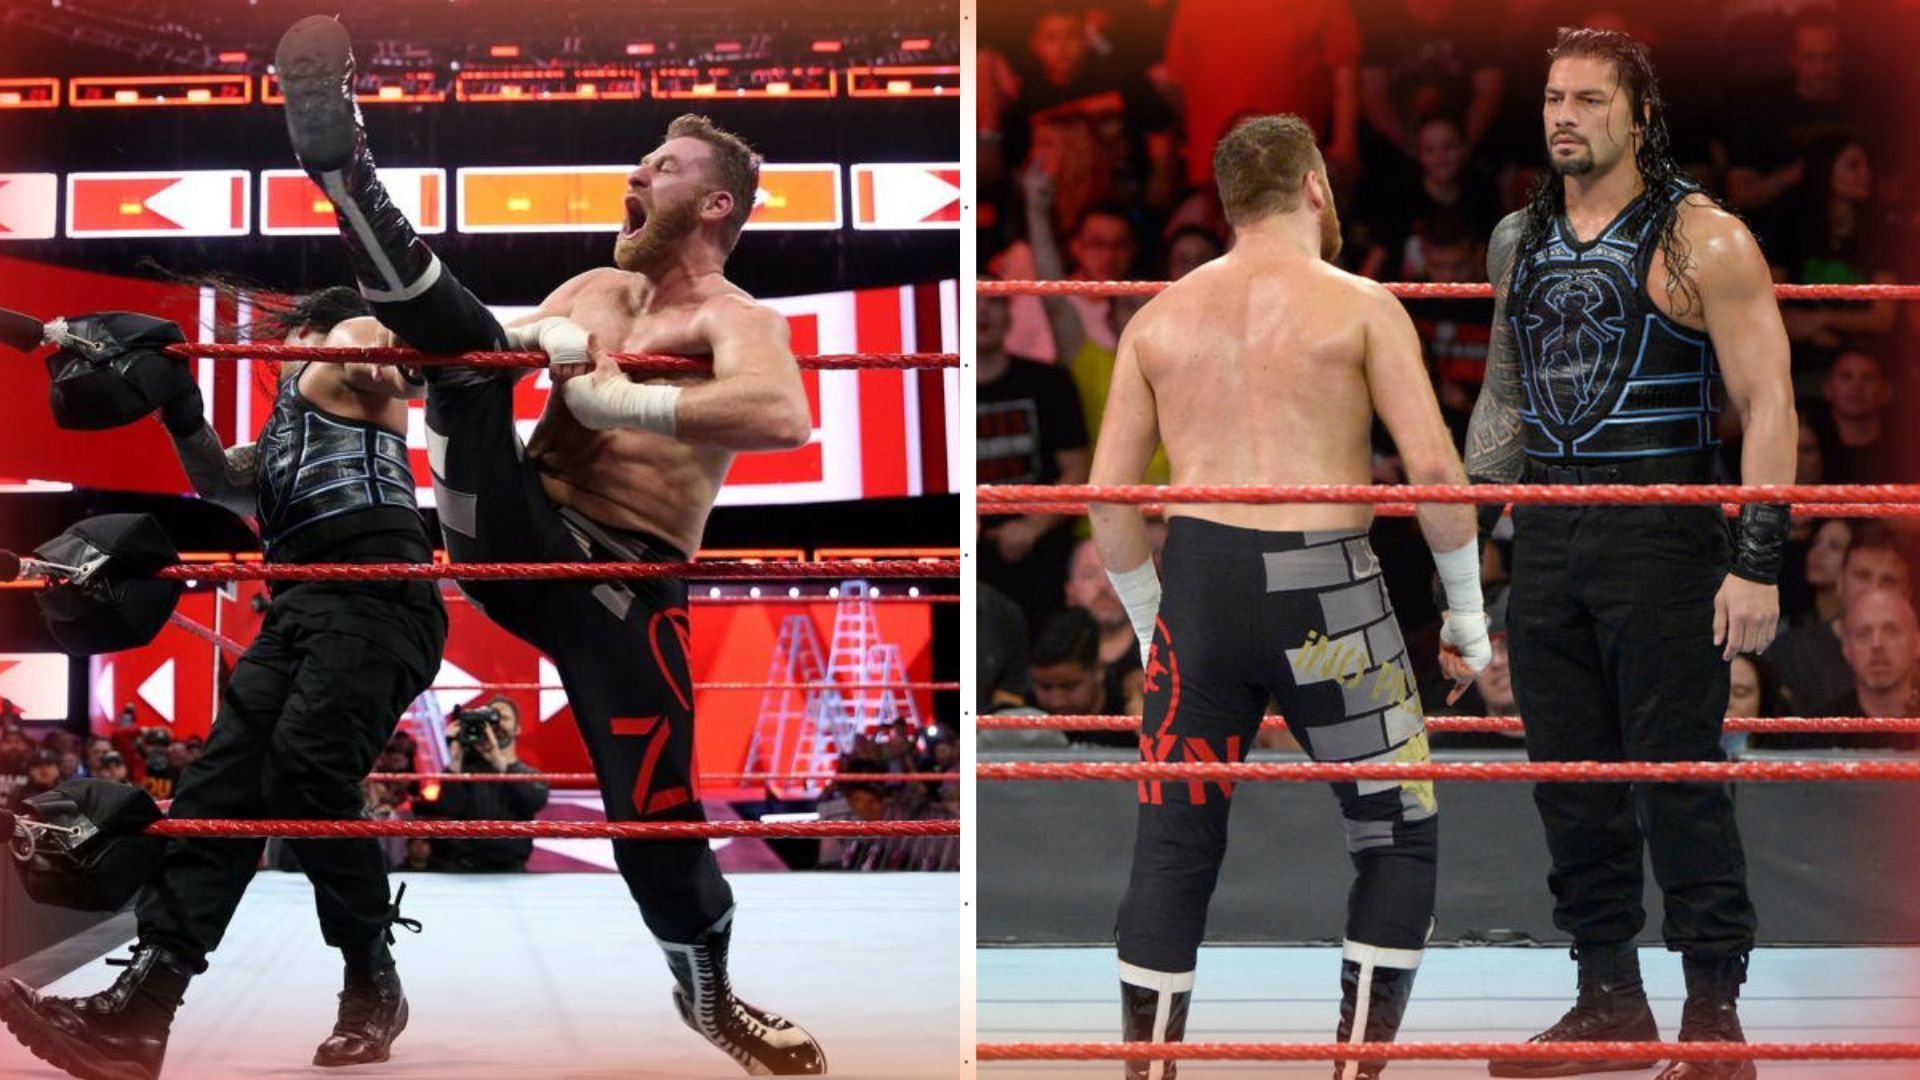 Sami Zayn turning on Roman Reigns is very much a possibility